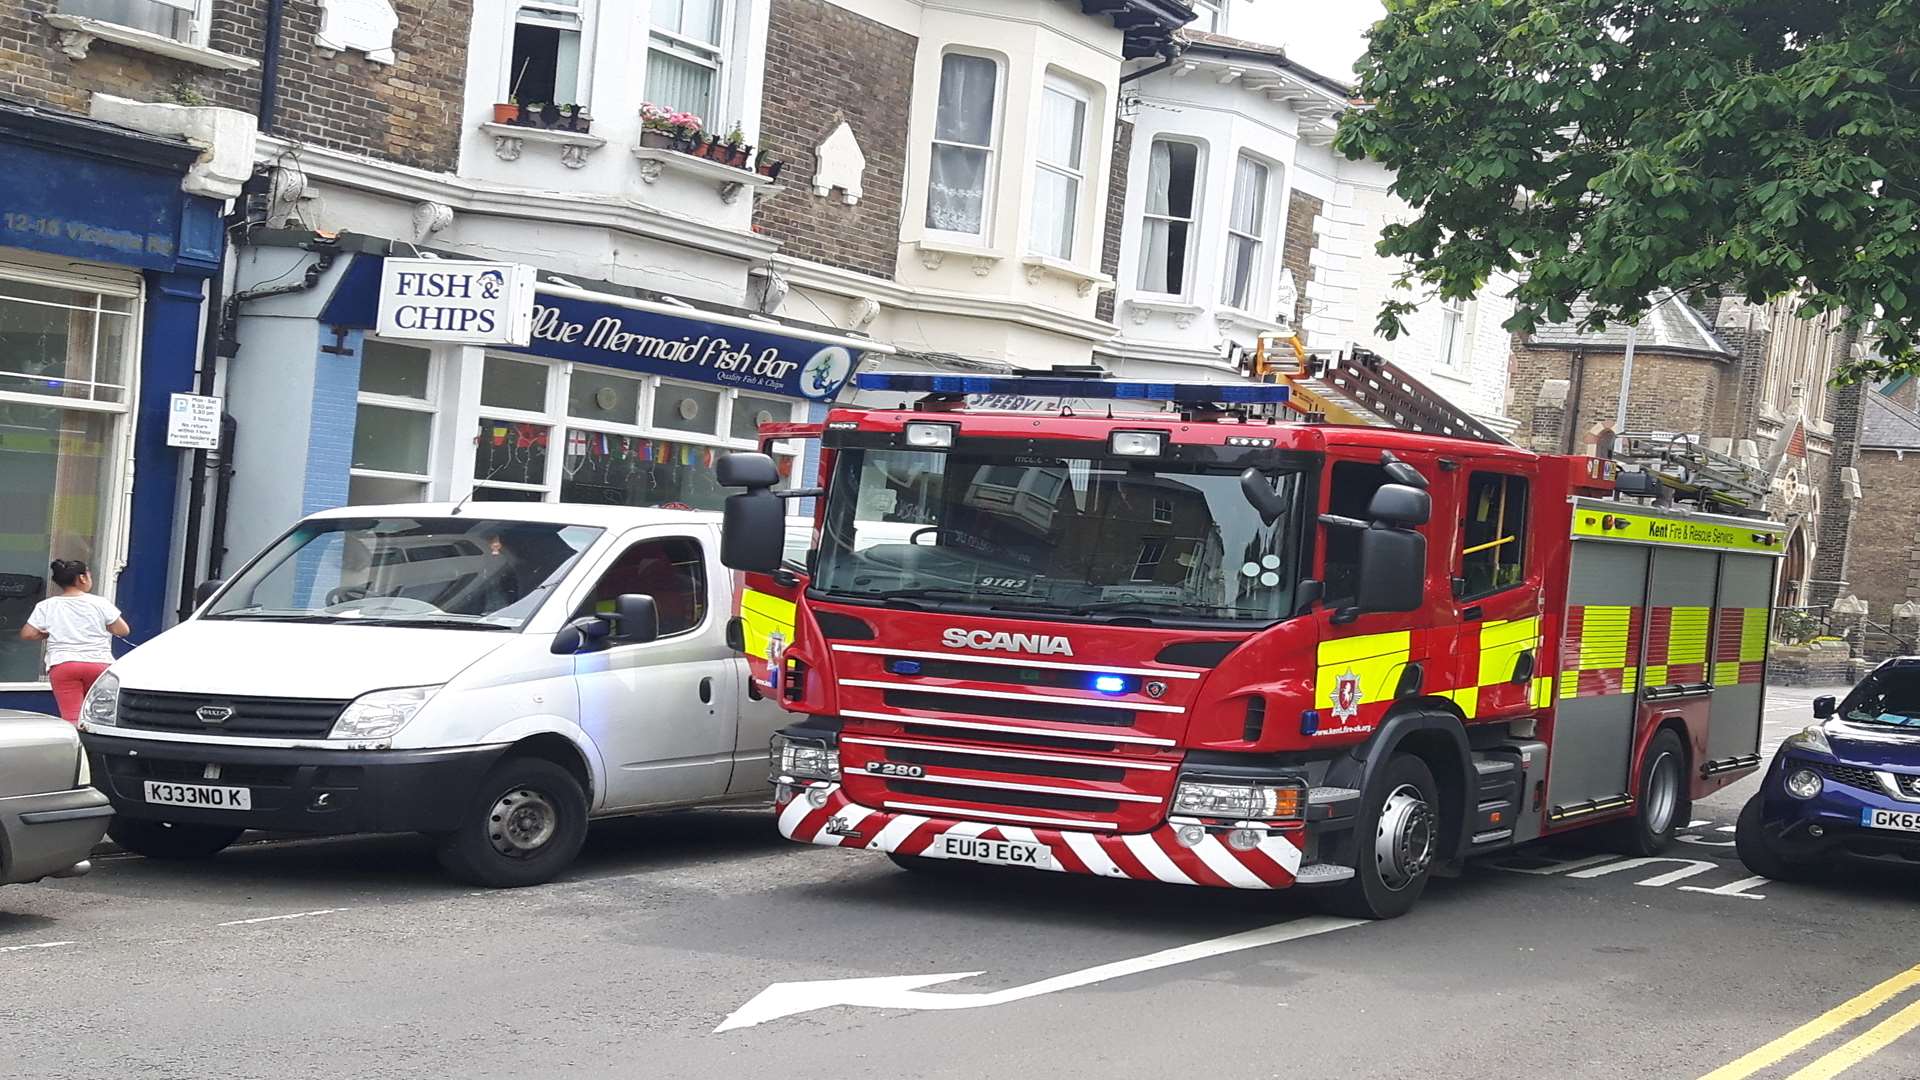 Fire fighters at the scene of the Blue Mermaid chip shop blaze, Deal.